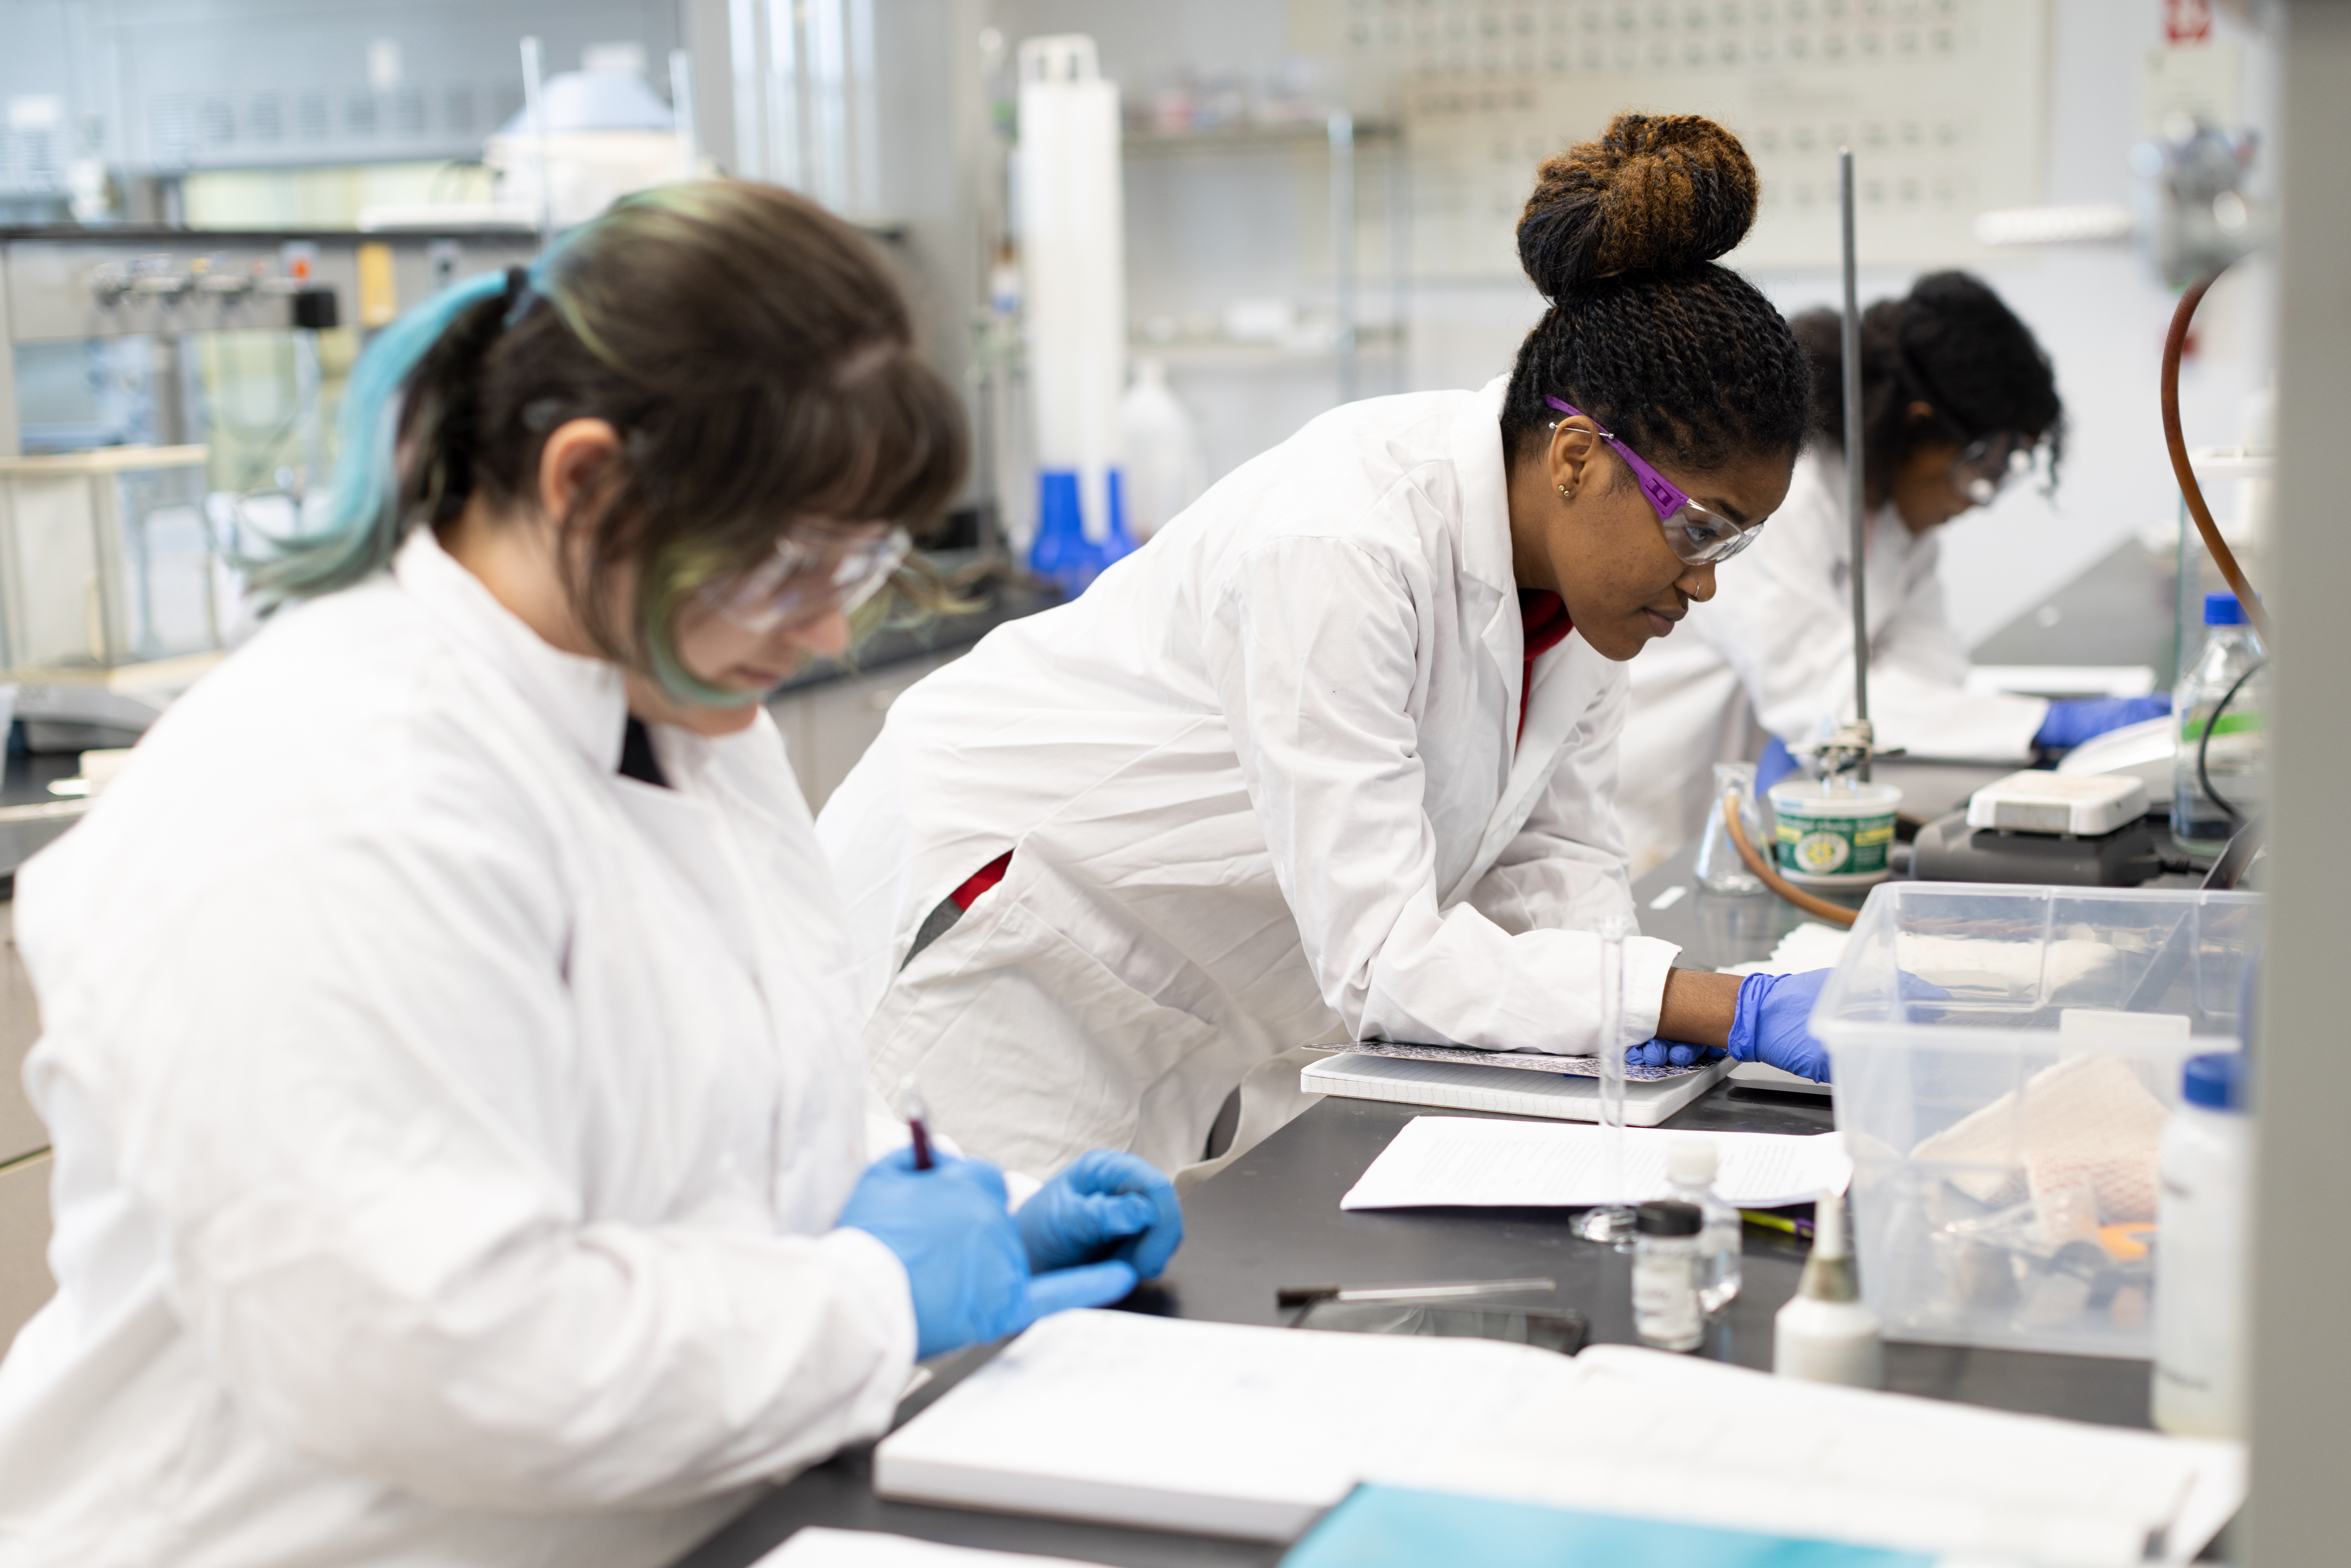 Female students in the lab working on an experiment.